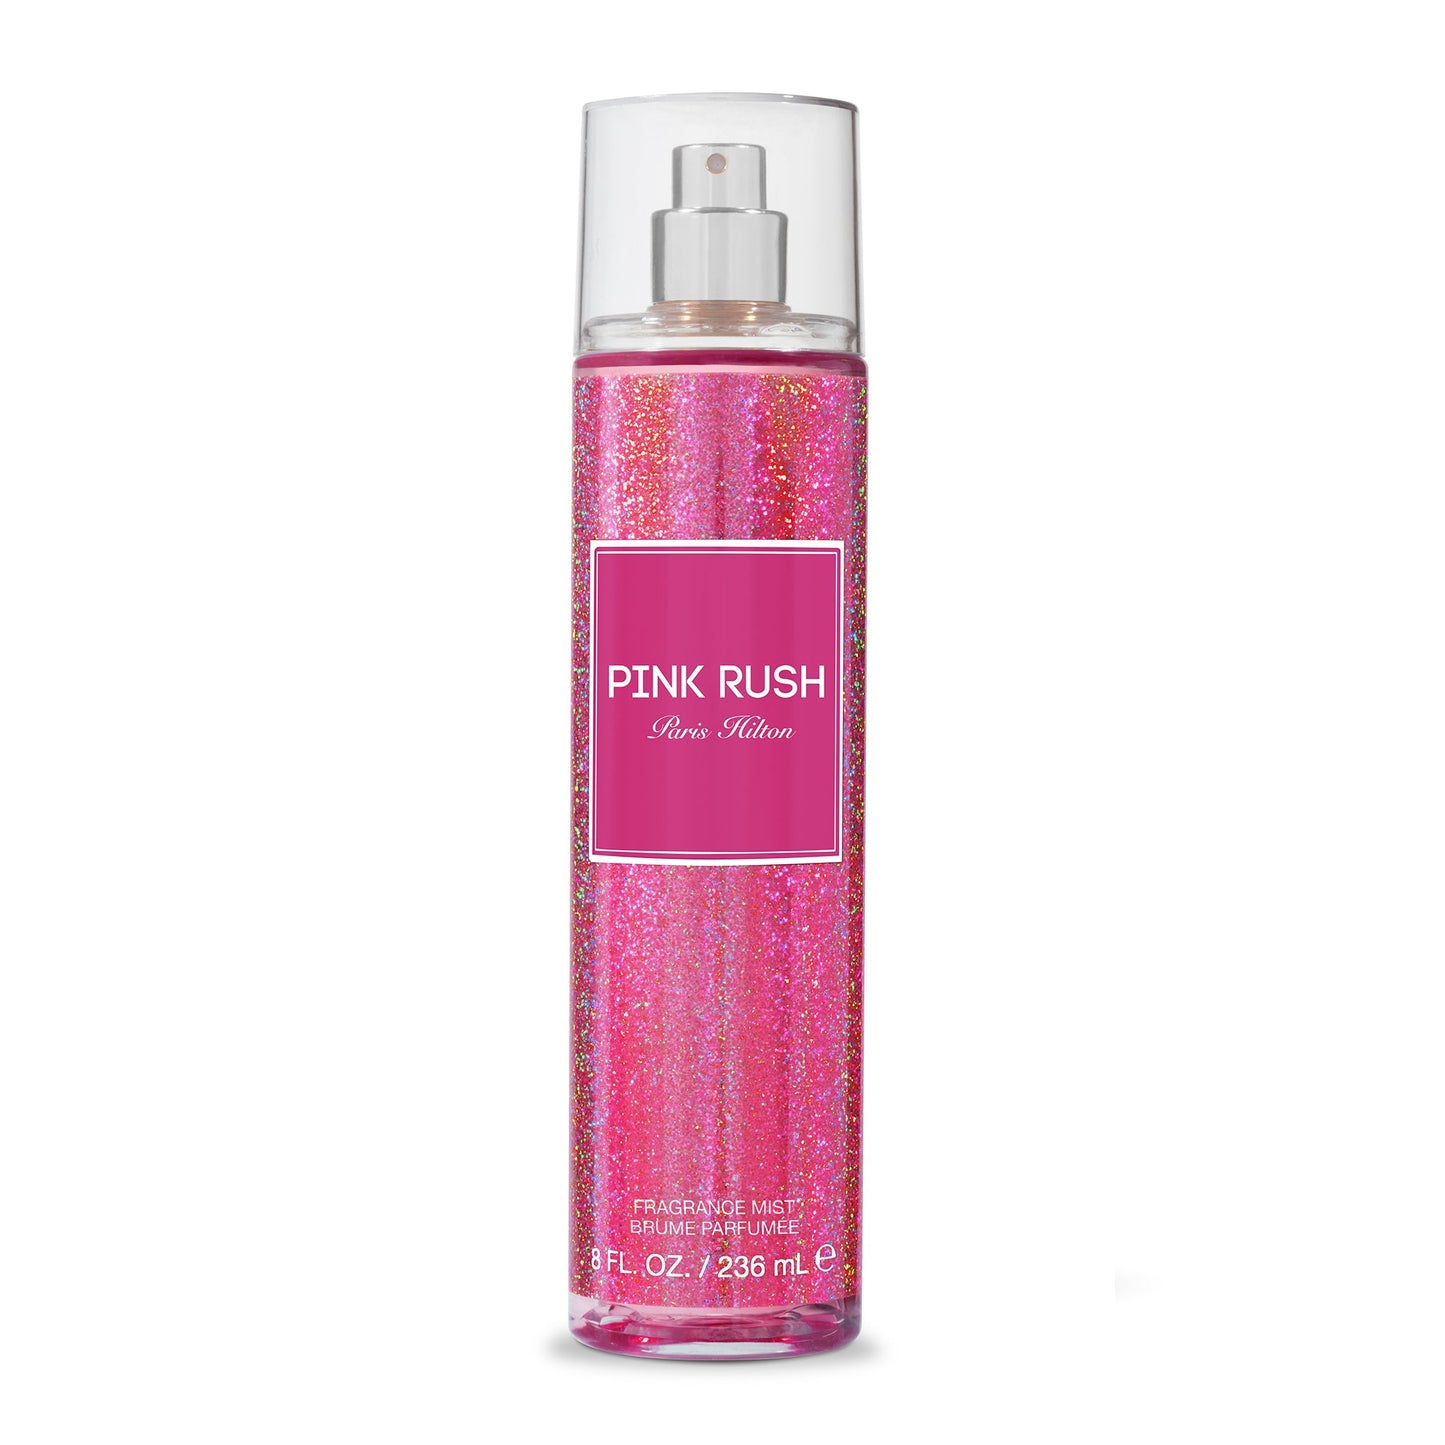 Load image into Gallery viewer, Pink Rush Body Spray 8oz by Paris Hilton Fragrances
